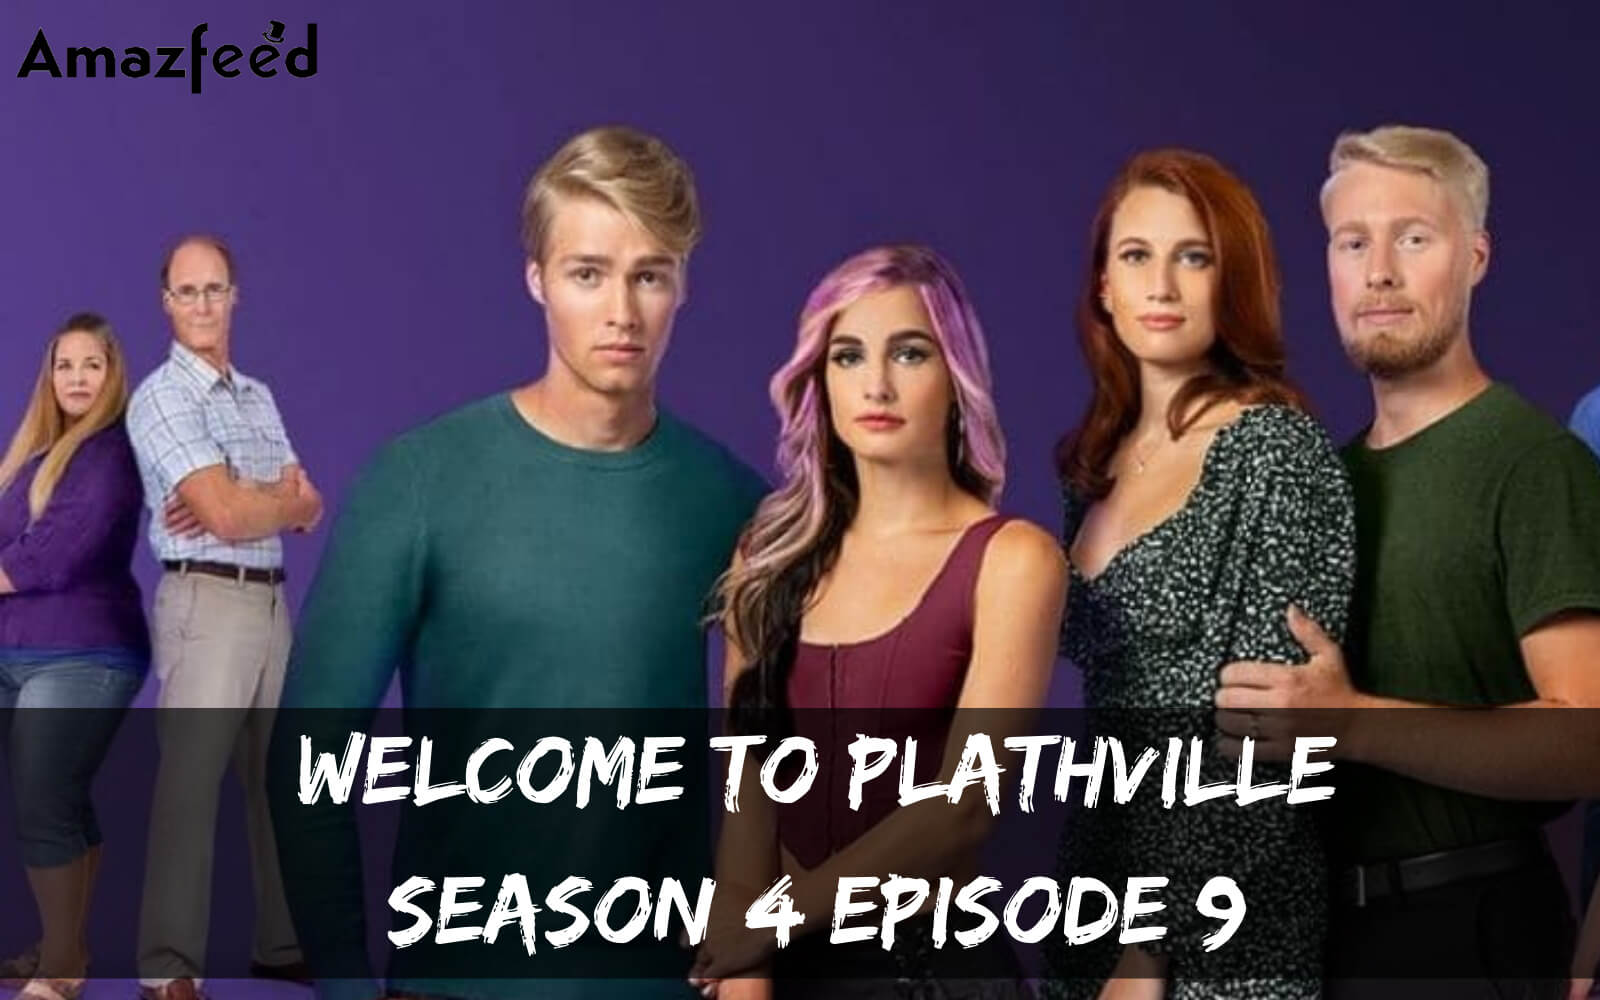 Welcome to Plathville season 4 Episode 9 release date